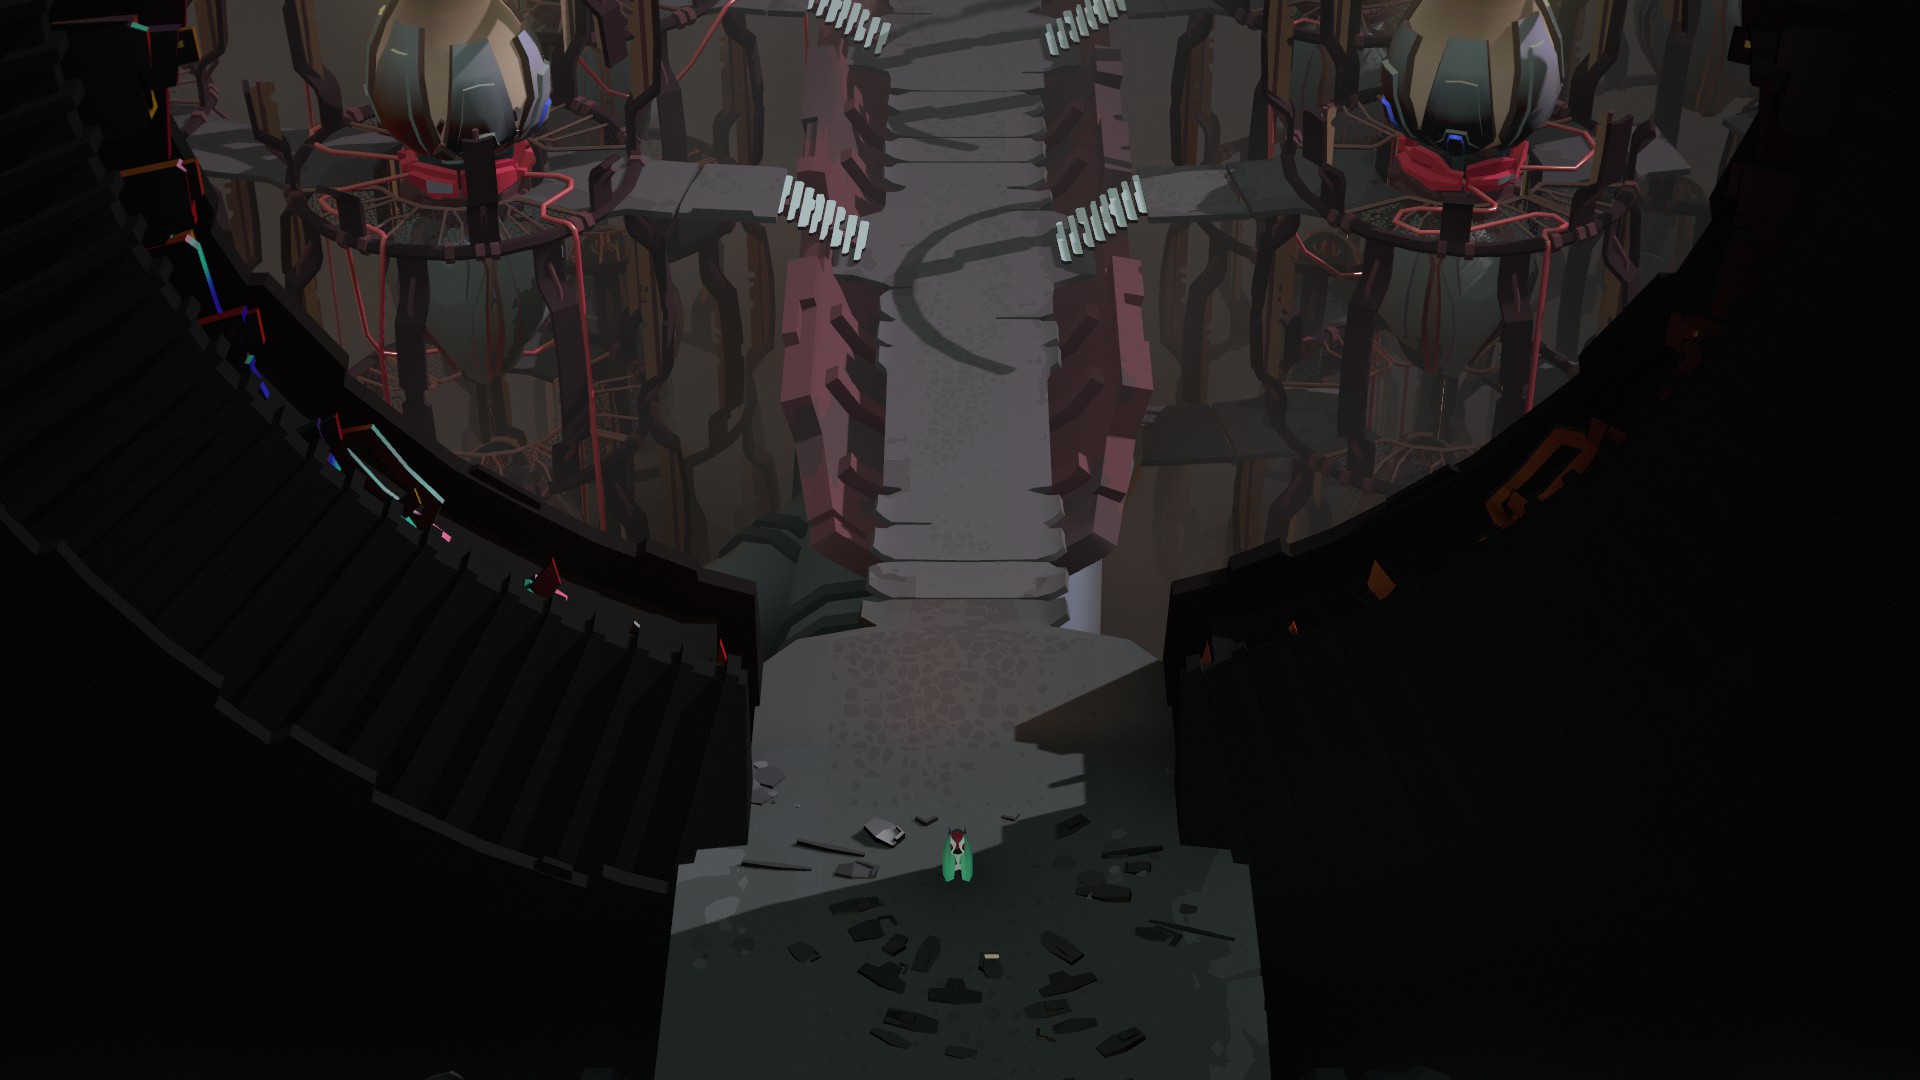 screenshot from the game Cocoon, showing the player character in front of an entranc